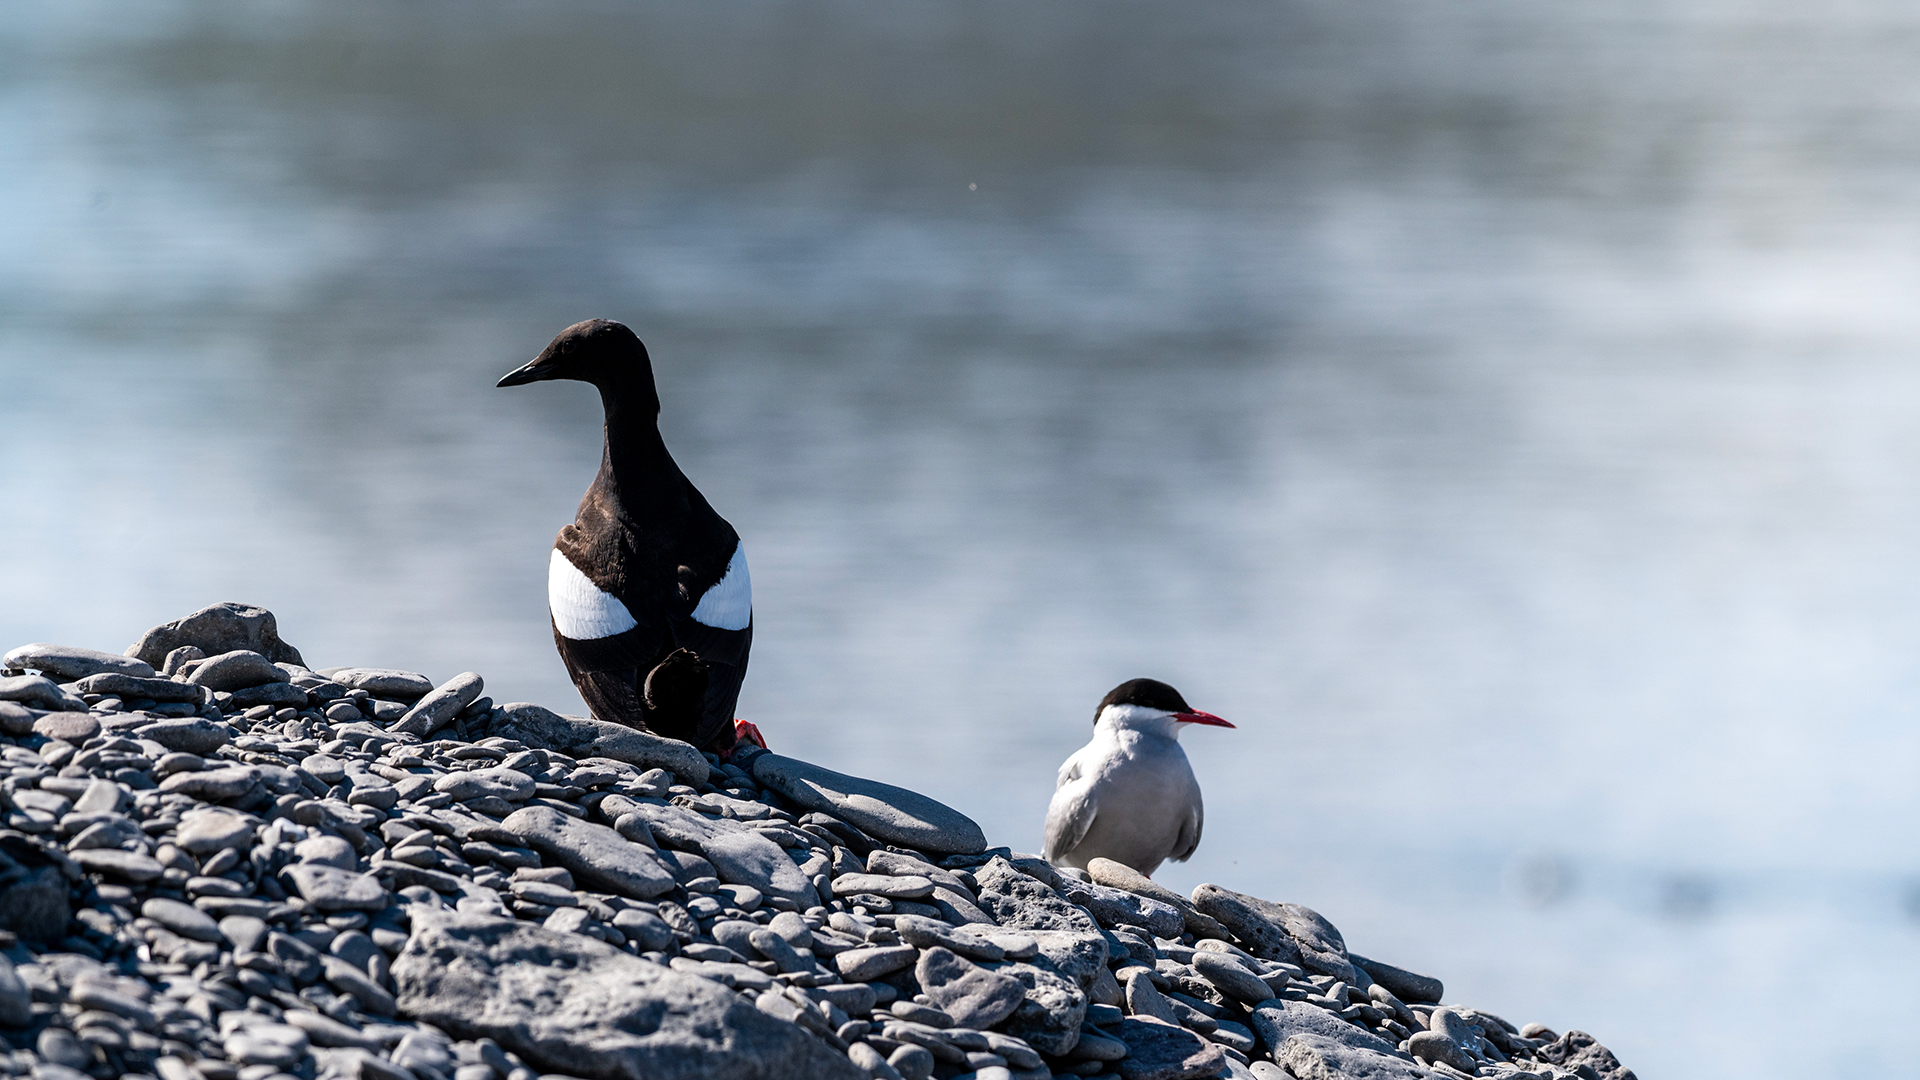 A black guillemot and an Arctic tern share a patch of beach. The breeding birds form dense clusters, a sight not commonly observed in many other parts of the world.